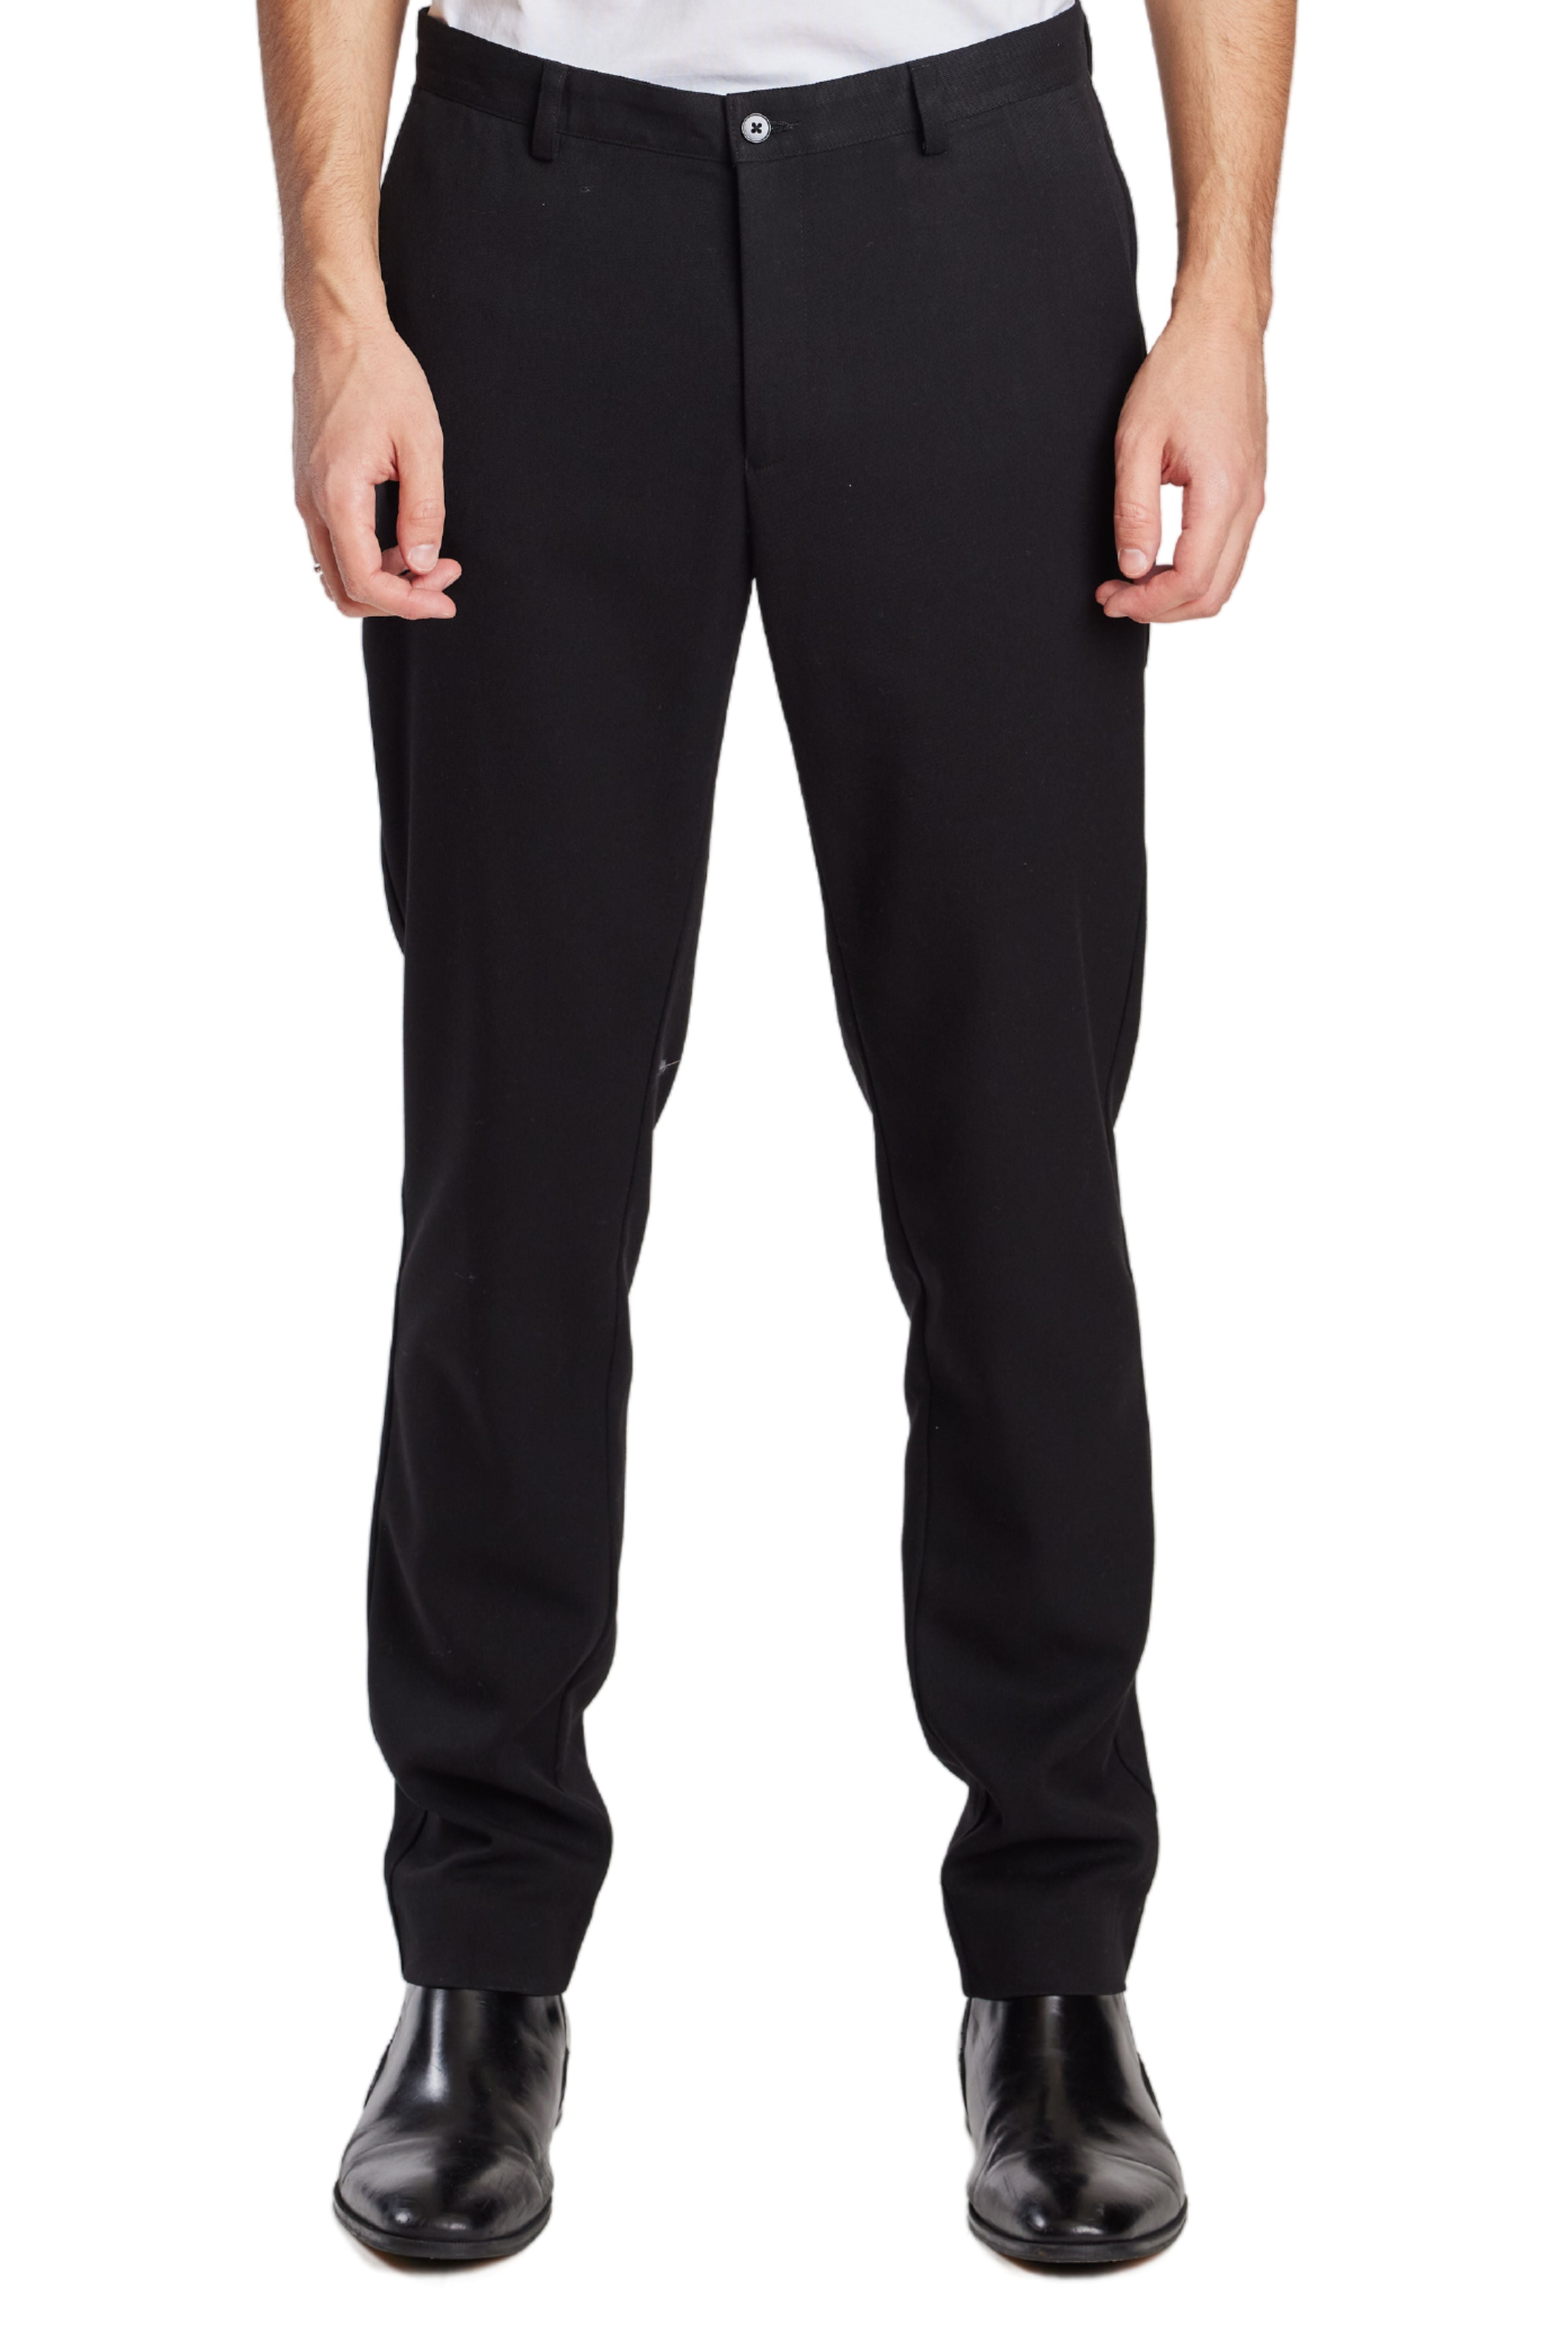 Buy Highlander Grey Tapered Fit Solid Chinos for Men Online at Rs.671 -  Ketch